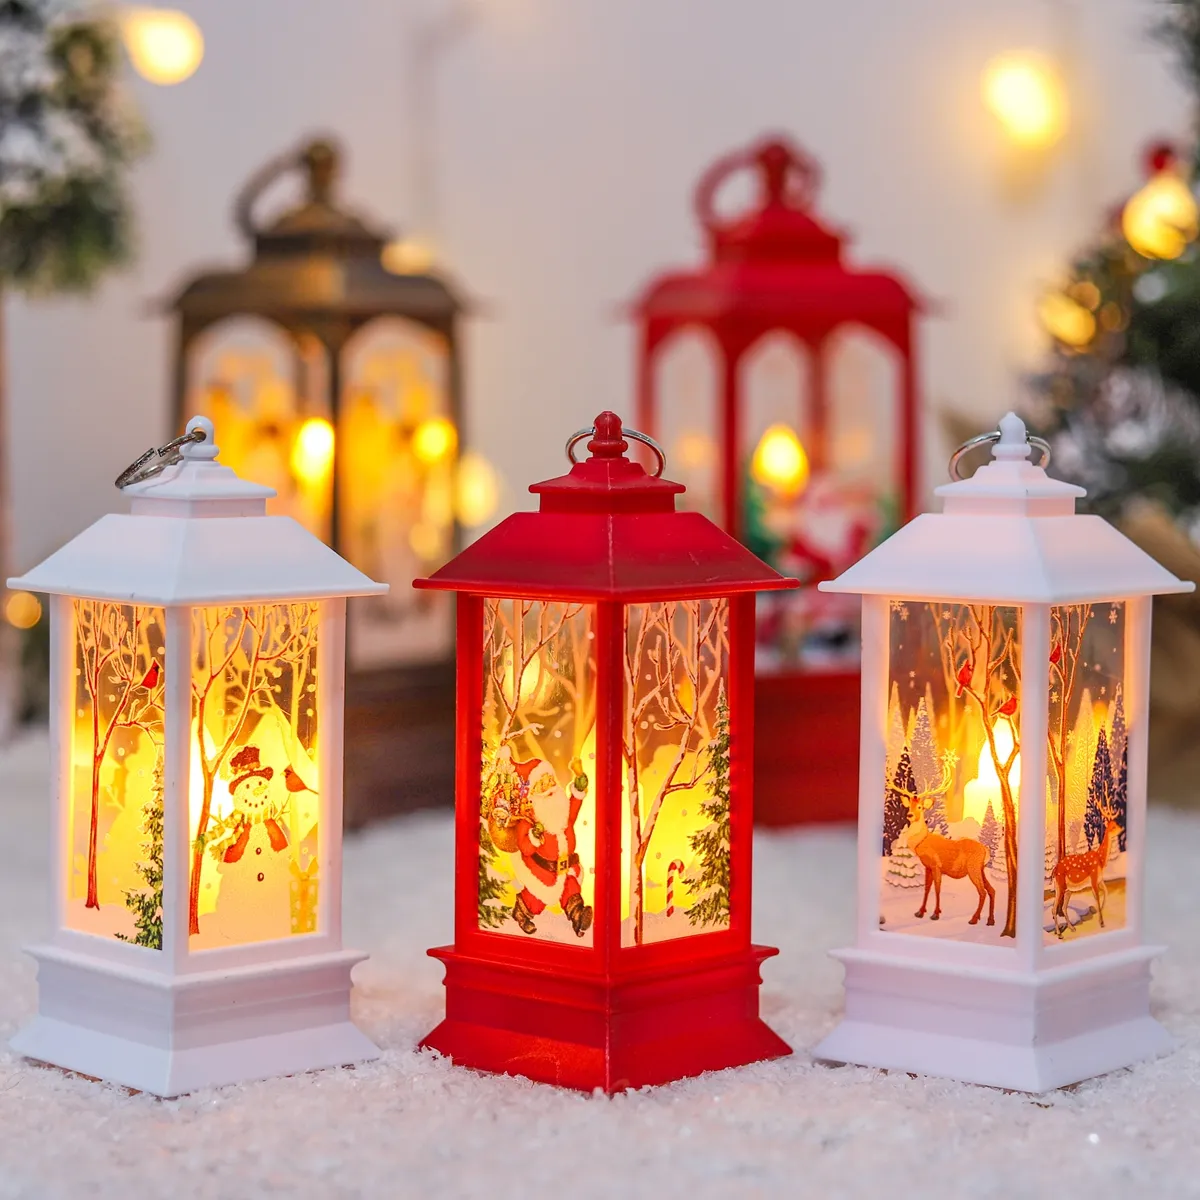 Christmas Lantern Light Merry Christmas Decorations for Home Christmas Tree Ornaments Xmas Gifts New Year 2023